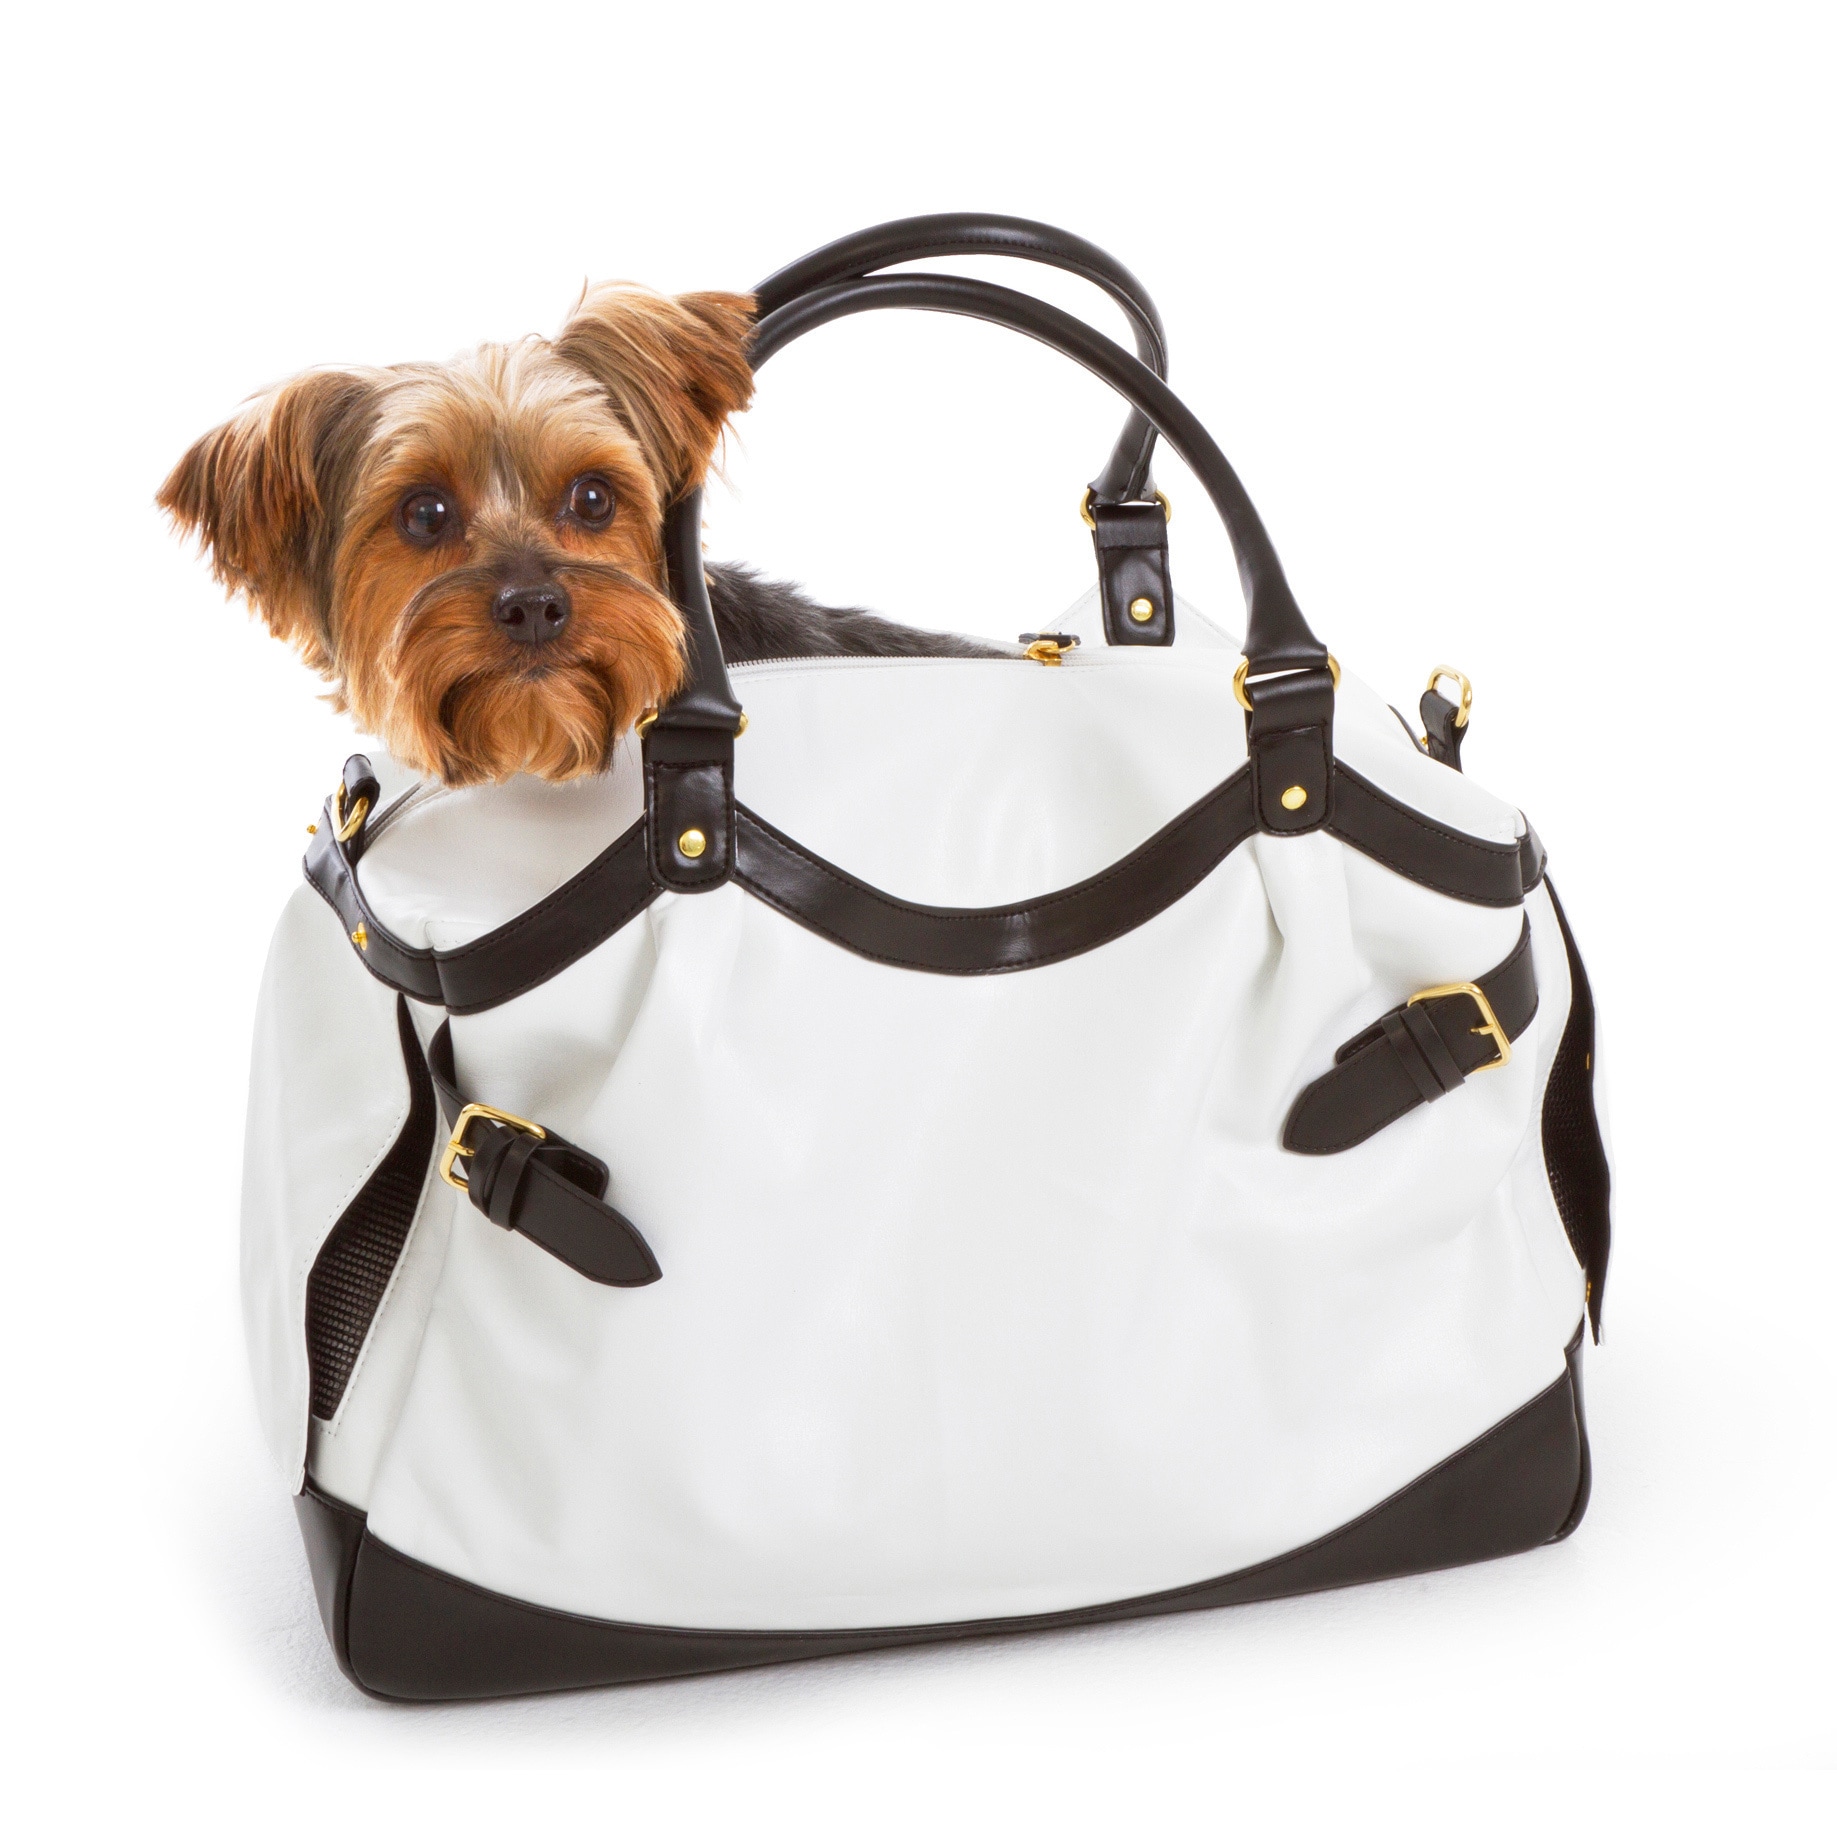 The Scarlett Pet Carrier Dog Designer Products Small Totes Bags Tote's Purse New